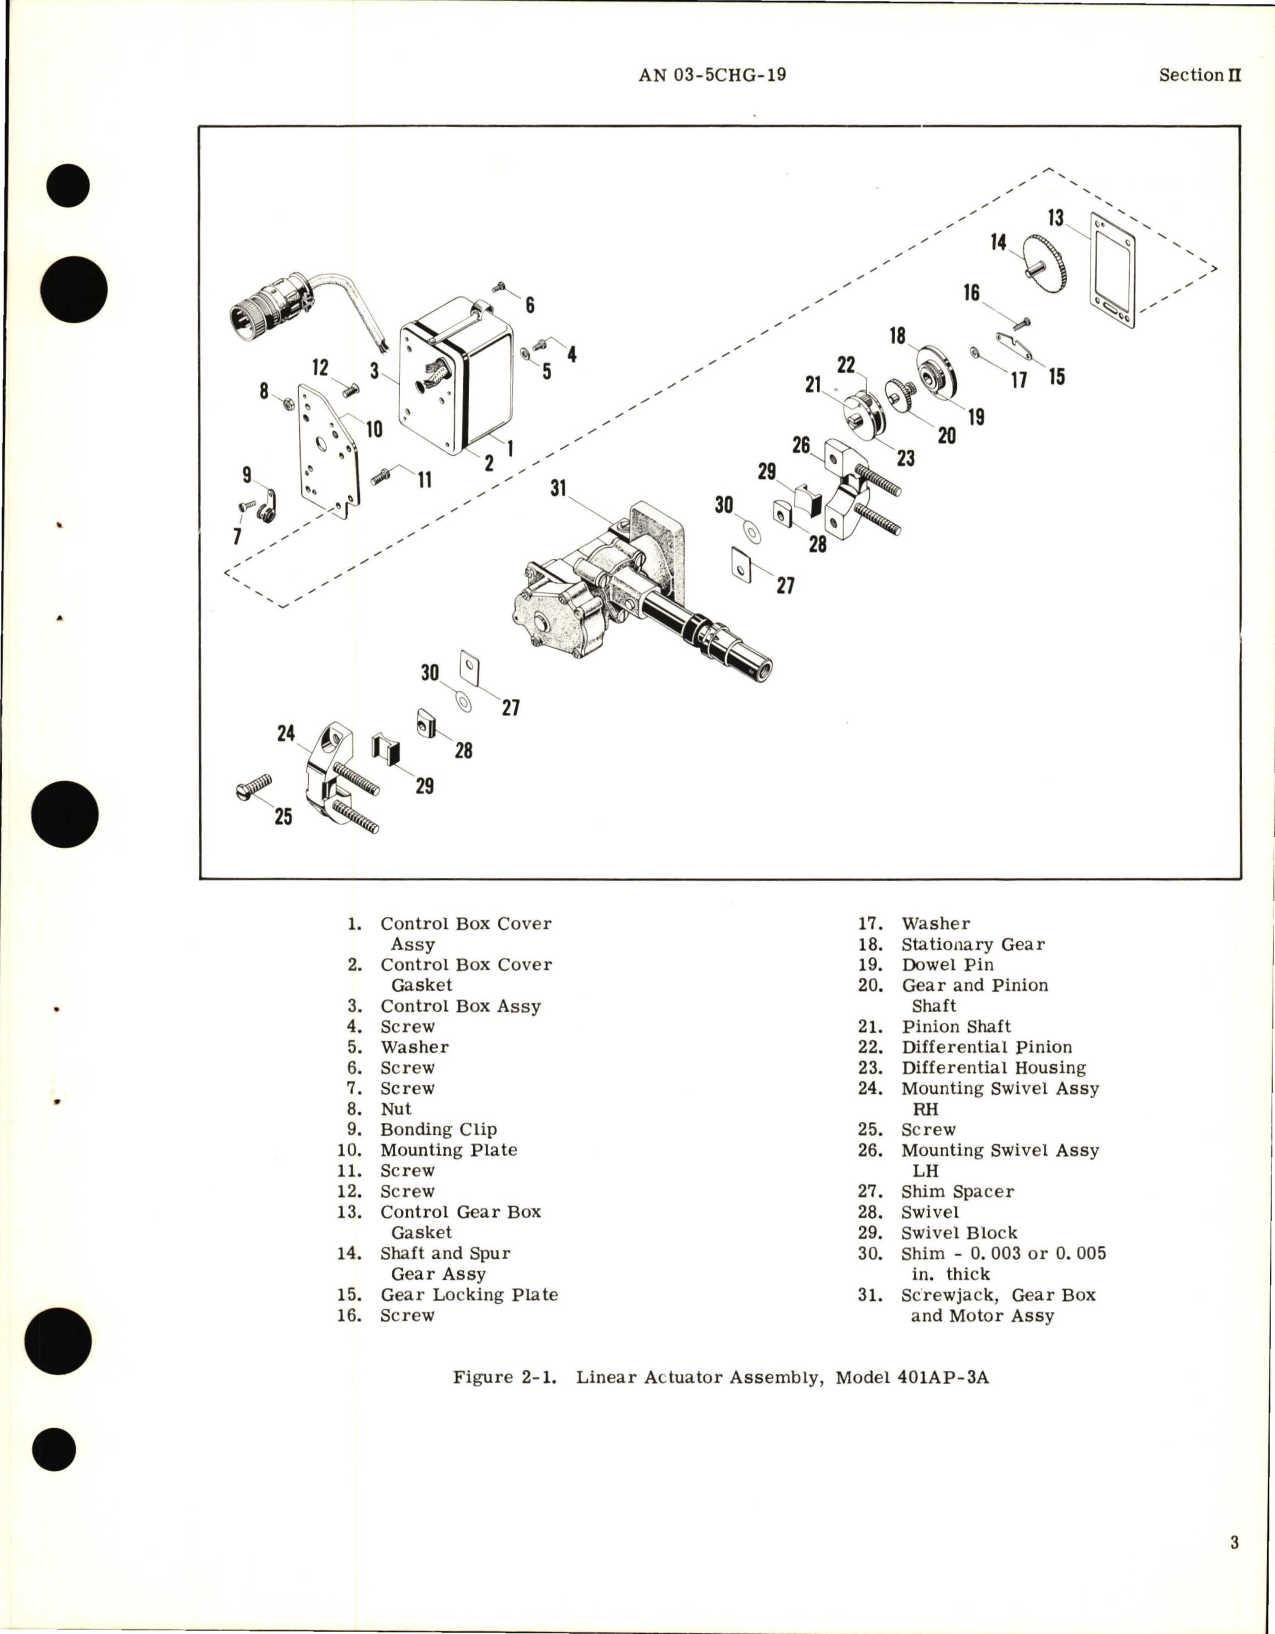 Sample page 5 from AirCorps Library document: Overhaul Instructions for Lear Linear Actuator Assembly 401